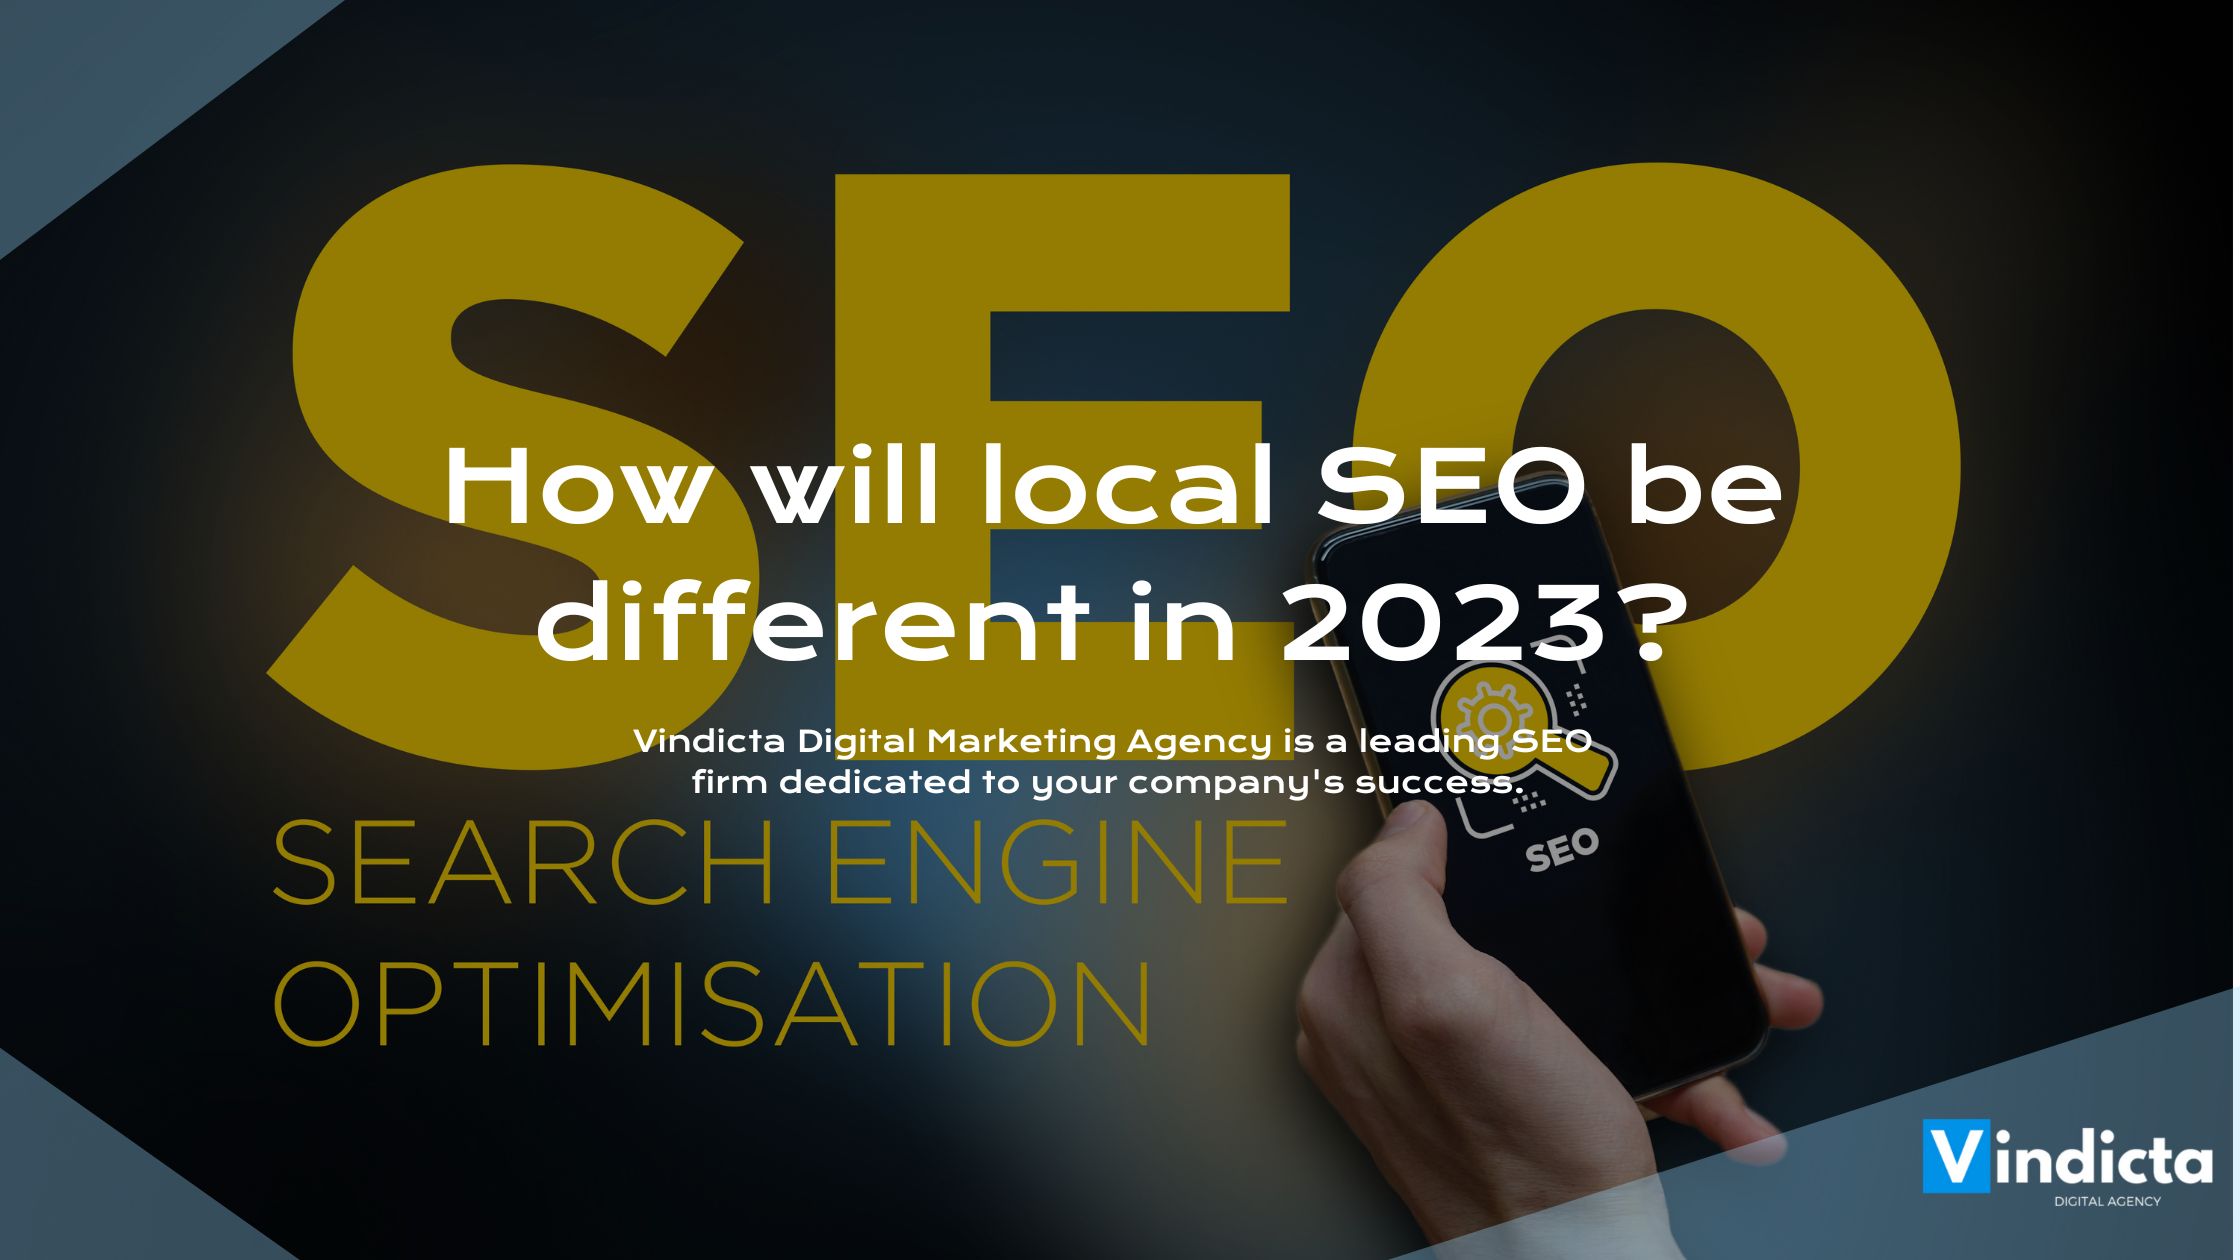 How will local SEO be different in 2023?